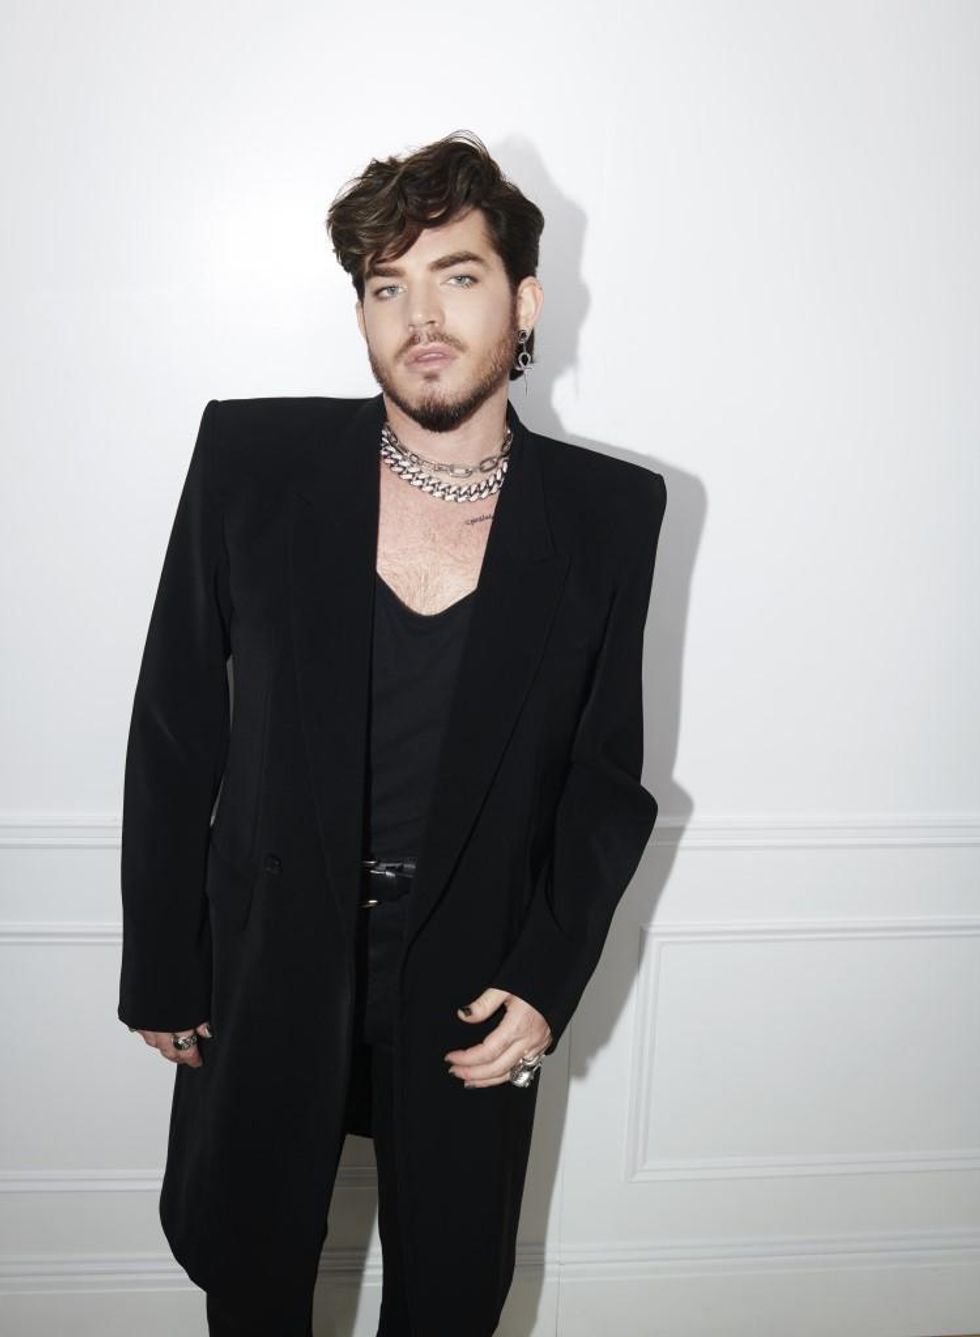 Behind the Glam Curtain With Adam Lambert and His LGBTQ+ Activism